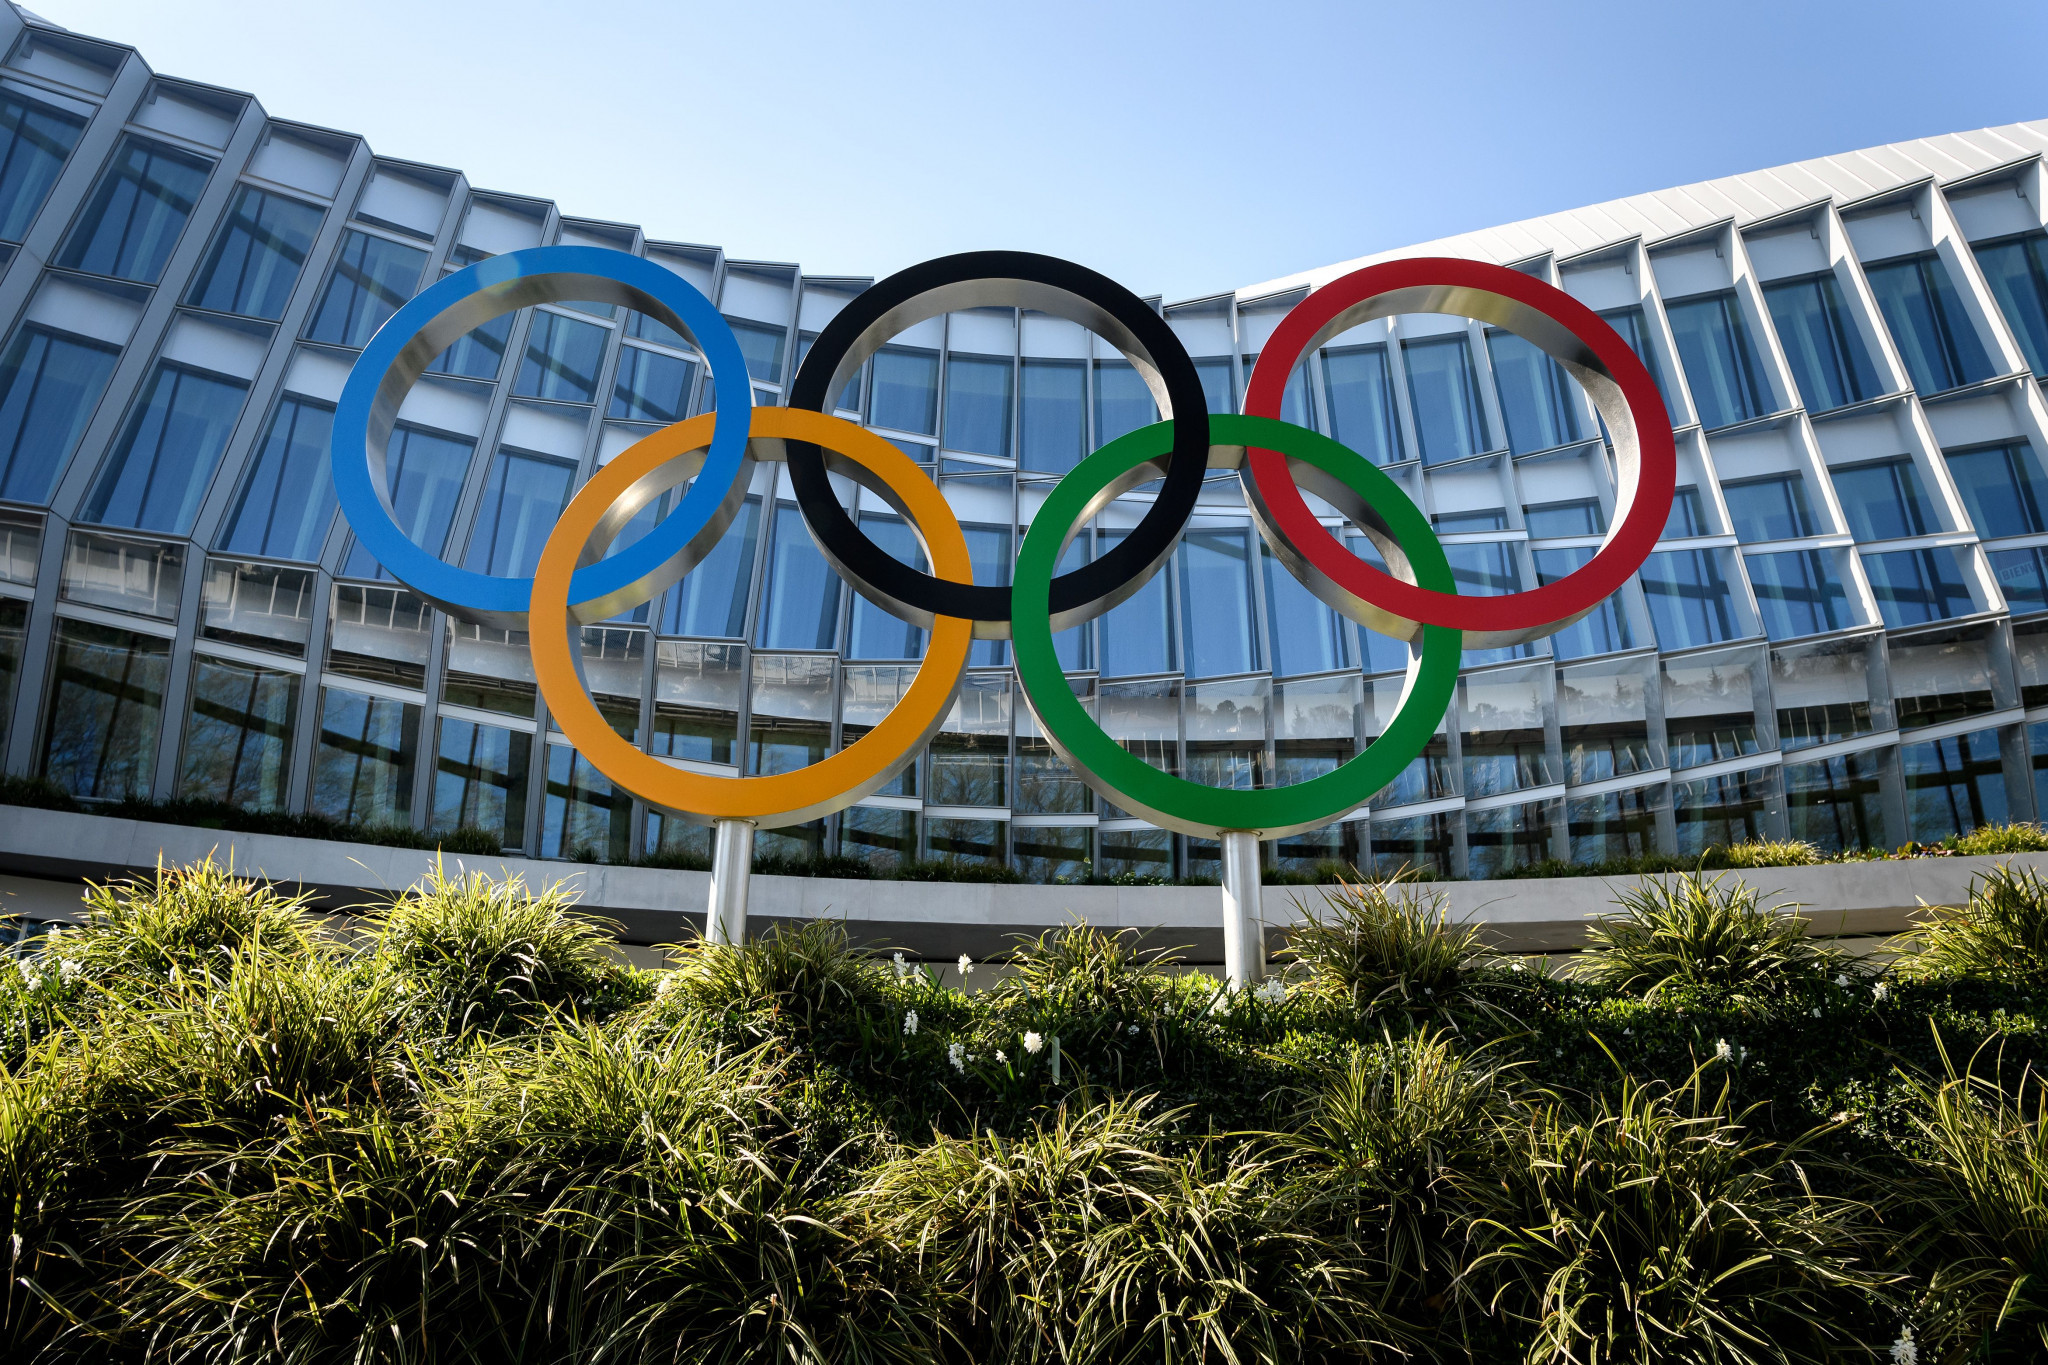 The IOC has said that its total revenue over what it seems to be referring to as the 